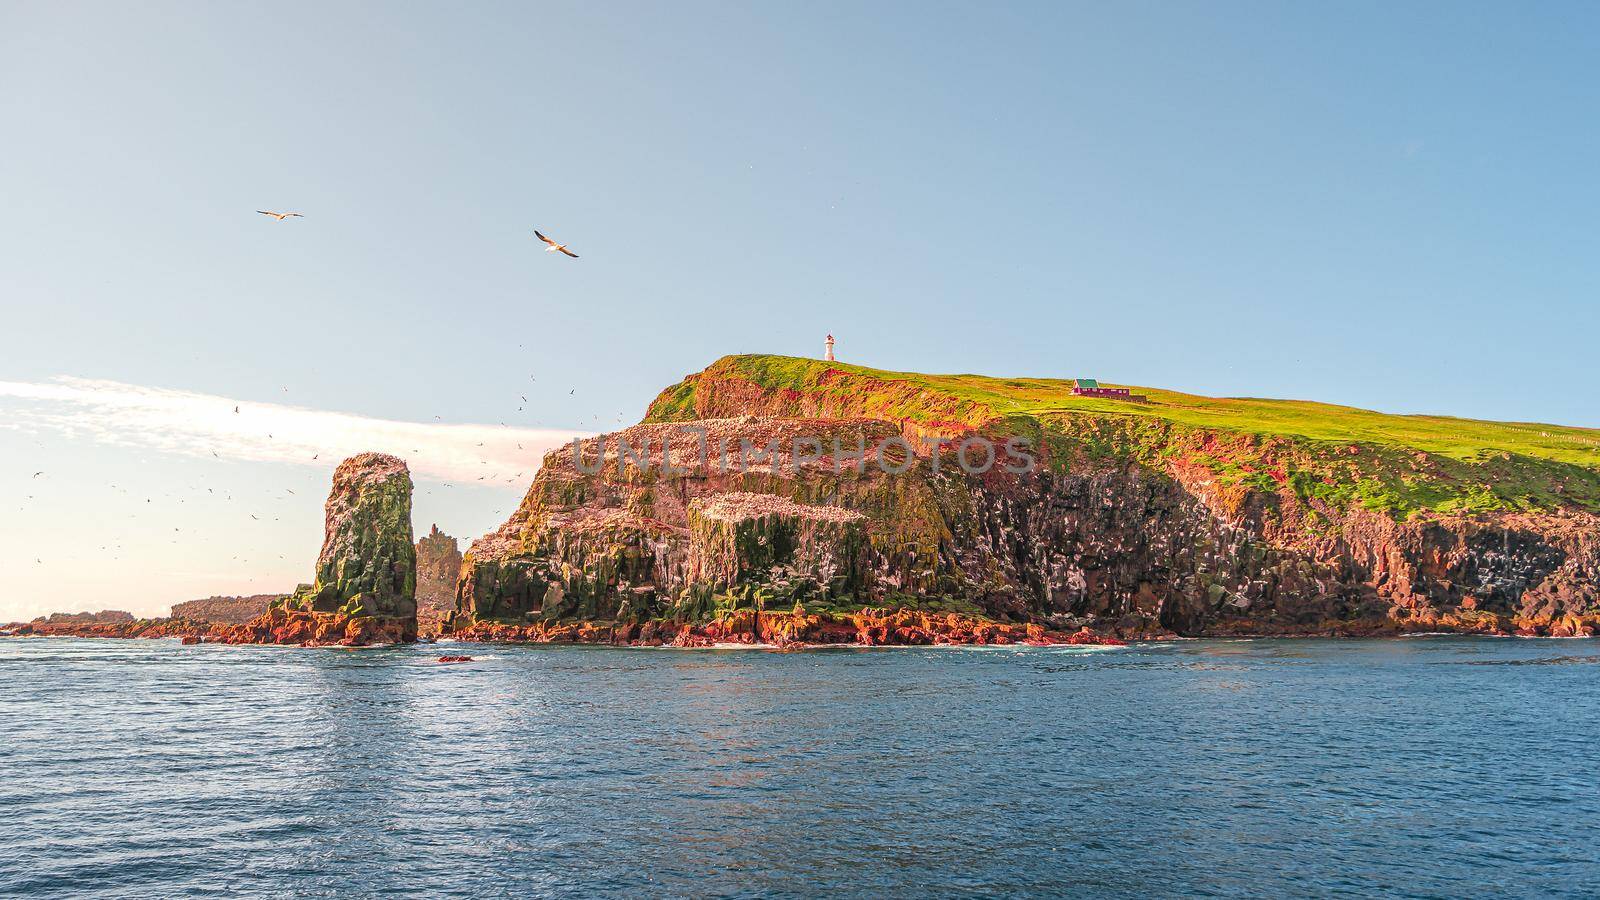 Panoramic view over mythical Faroe Island Mykines sunset in the middle of Atlantic Ocean with a lot of puffins, parrot like seabirds